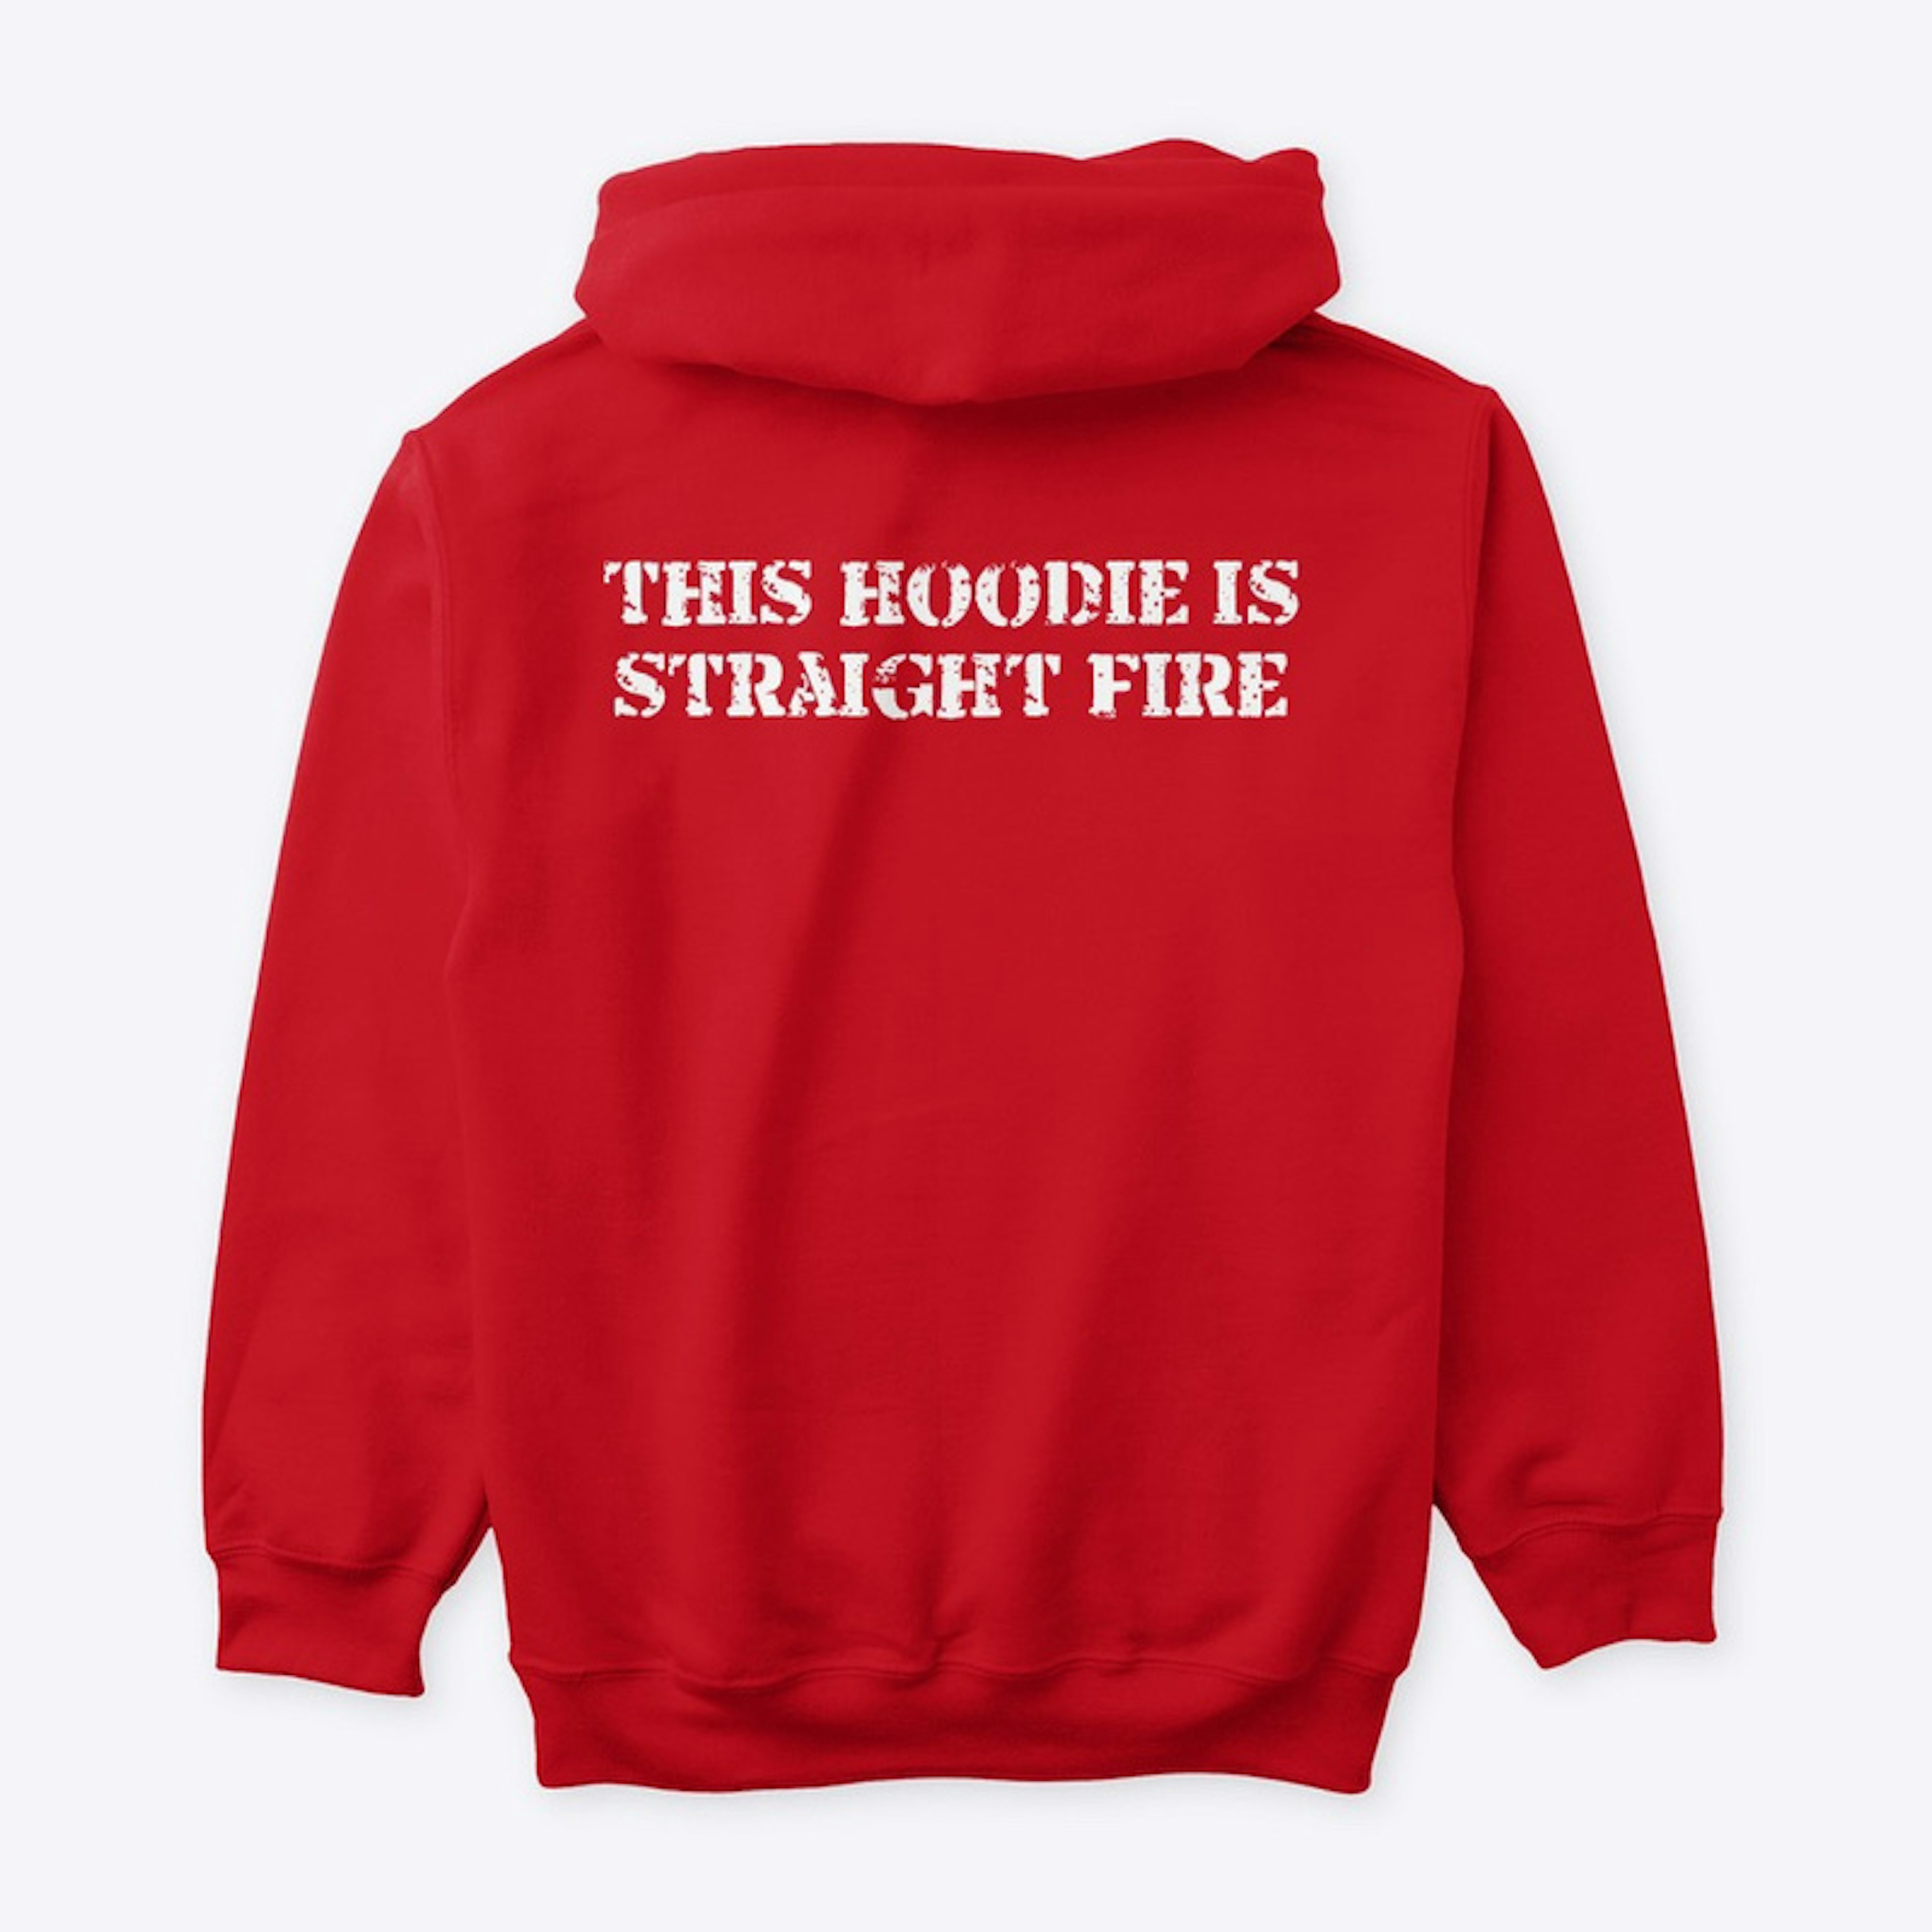 This Hoodie is Straight fire